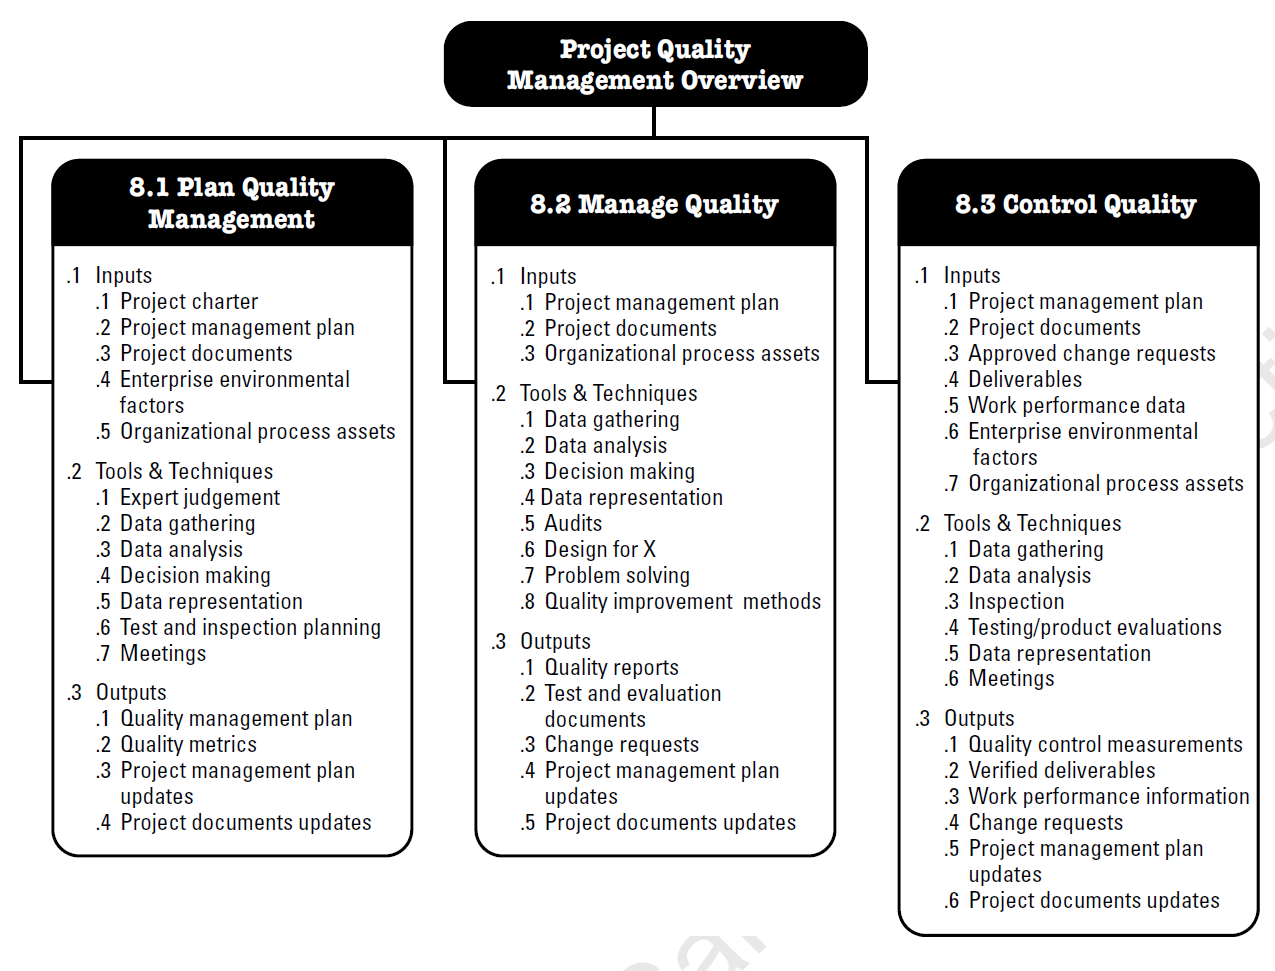 Quality management tools and practices to project management performance